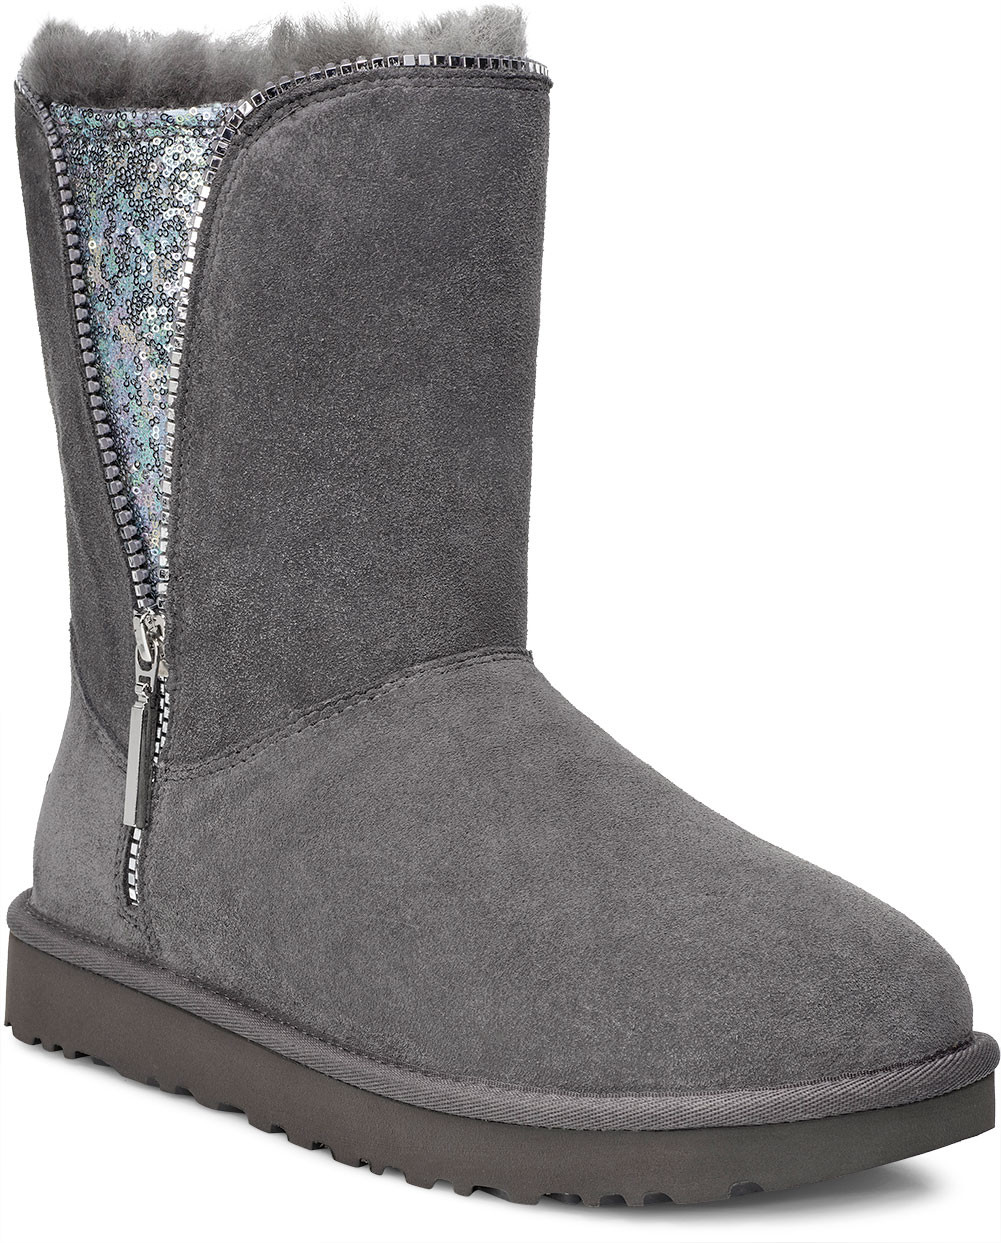 ugg classic short sparkle zip exclusive boots charcoal